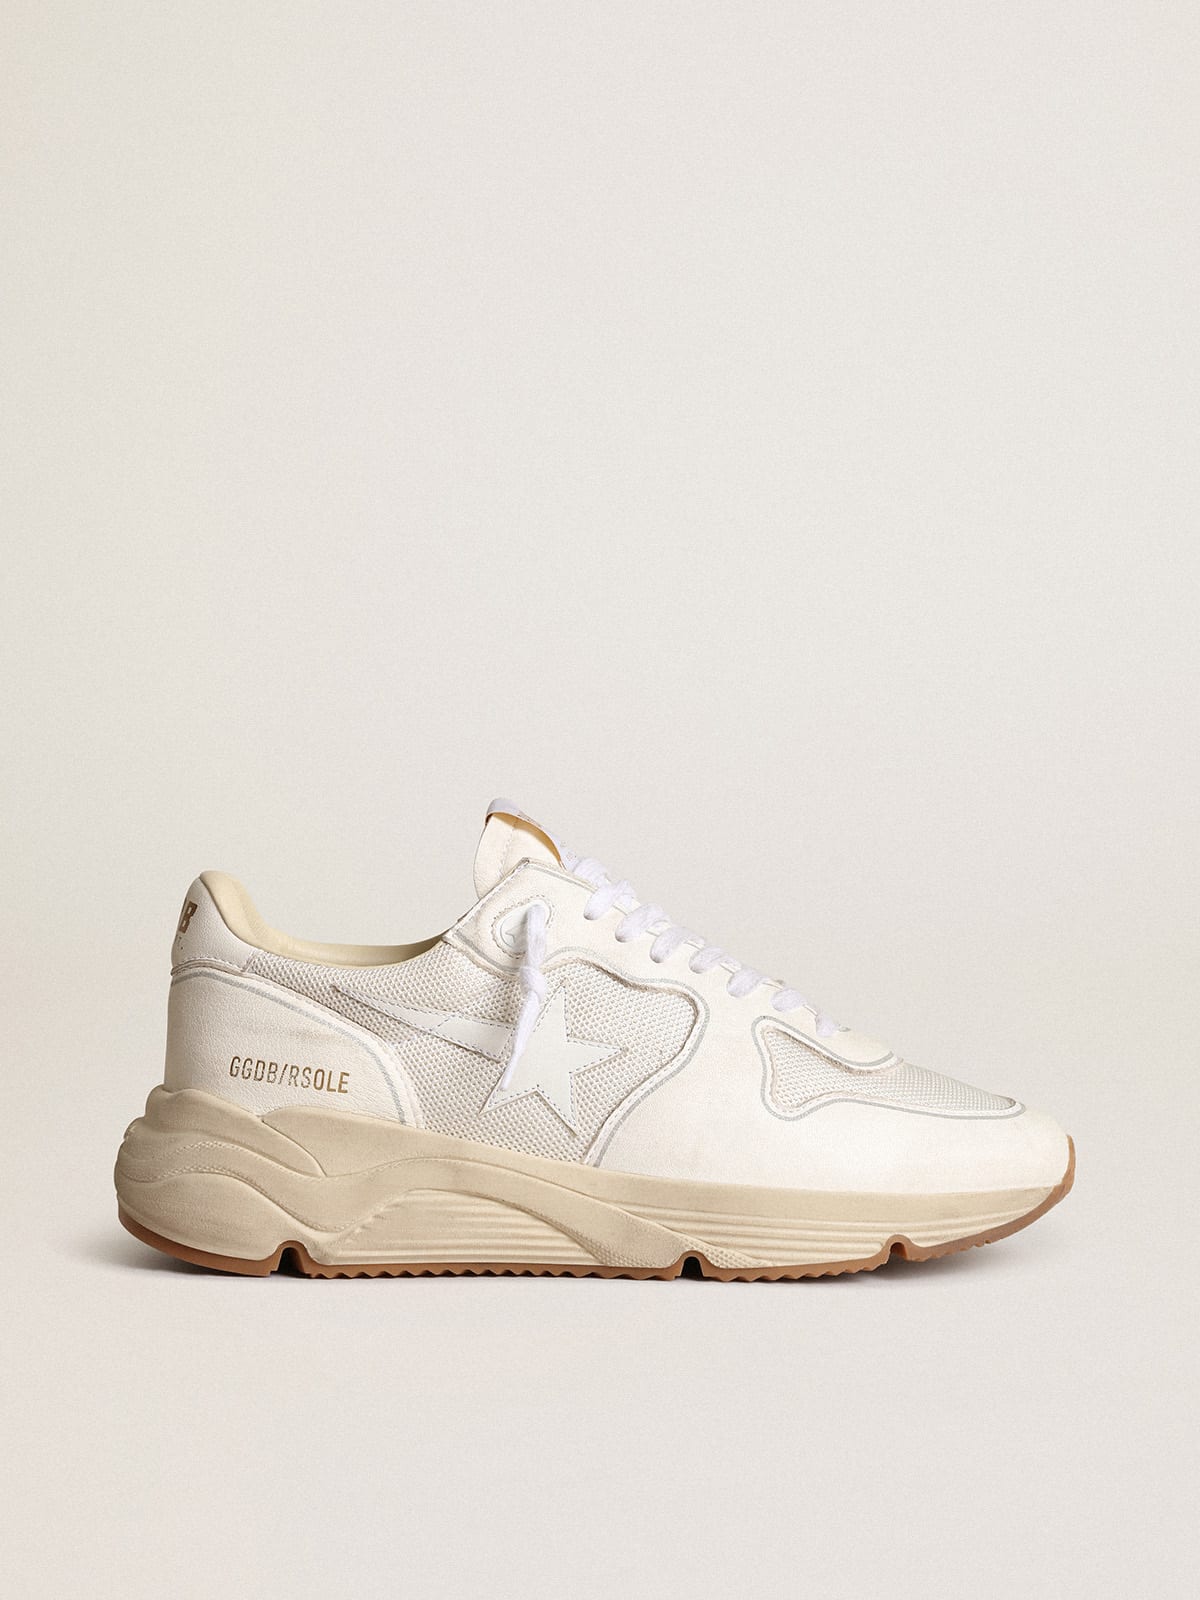 Women's Running sole sneakers in optical-white mesh and nappa leather with white leather star